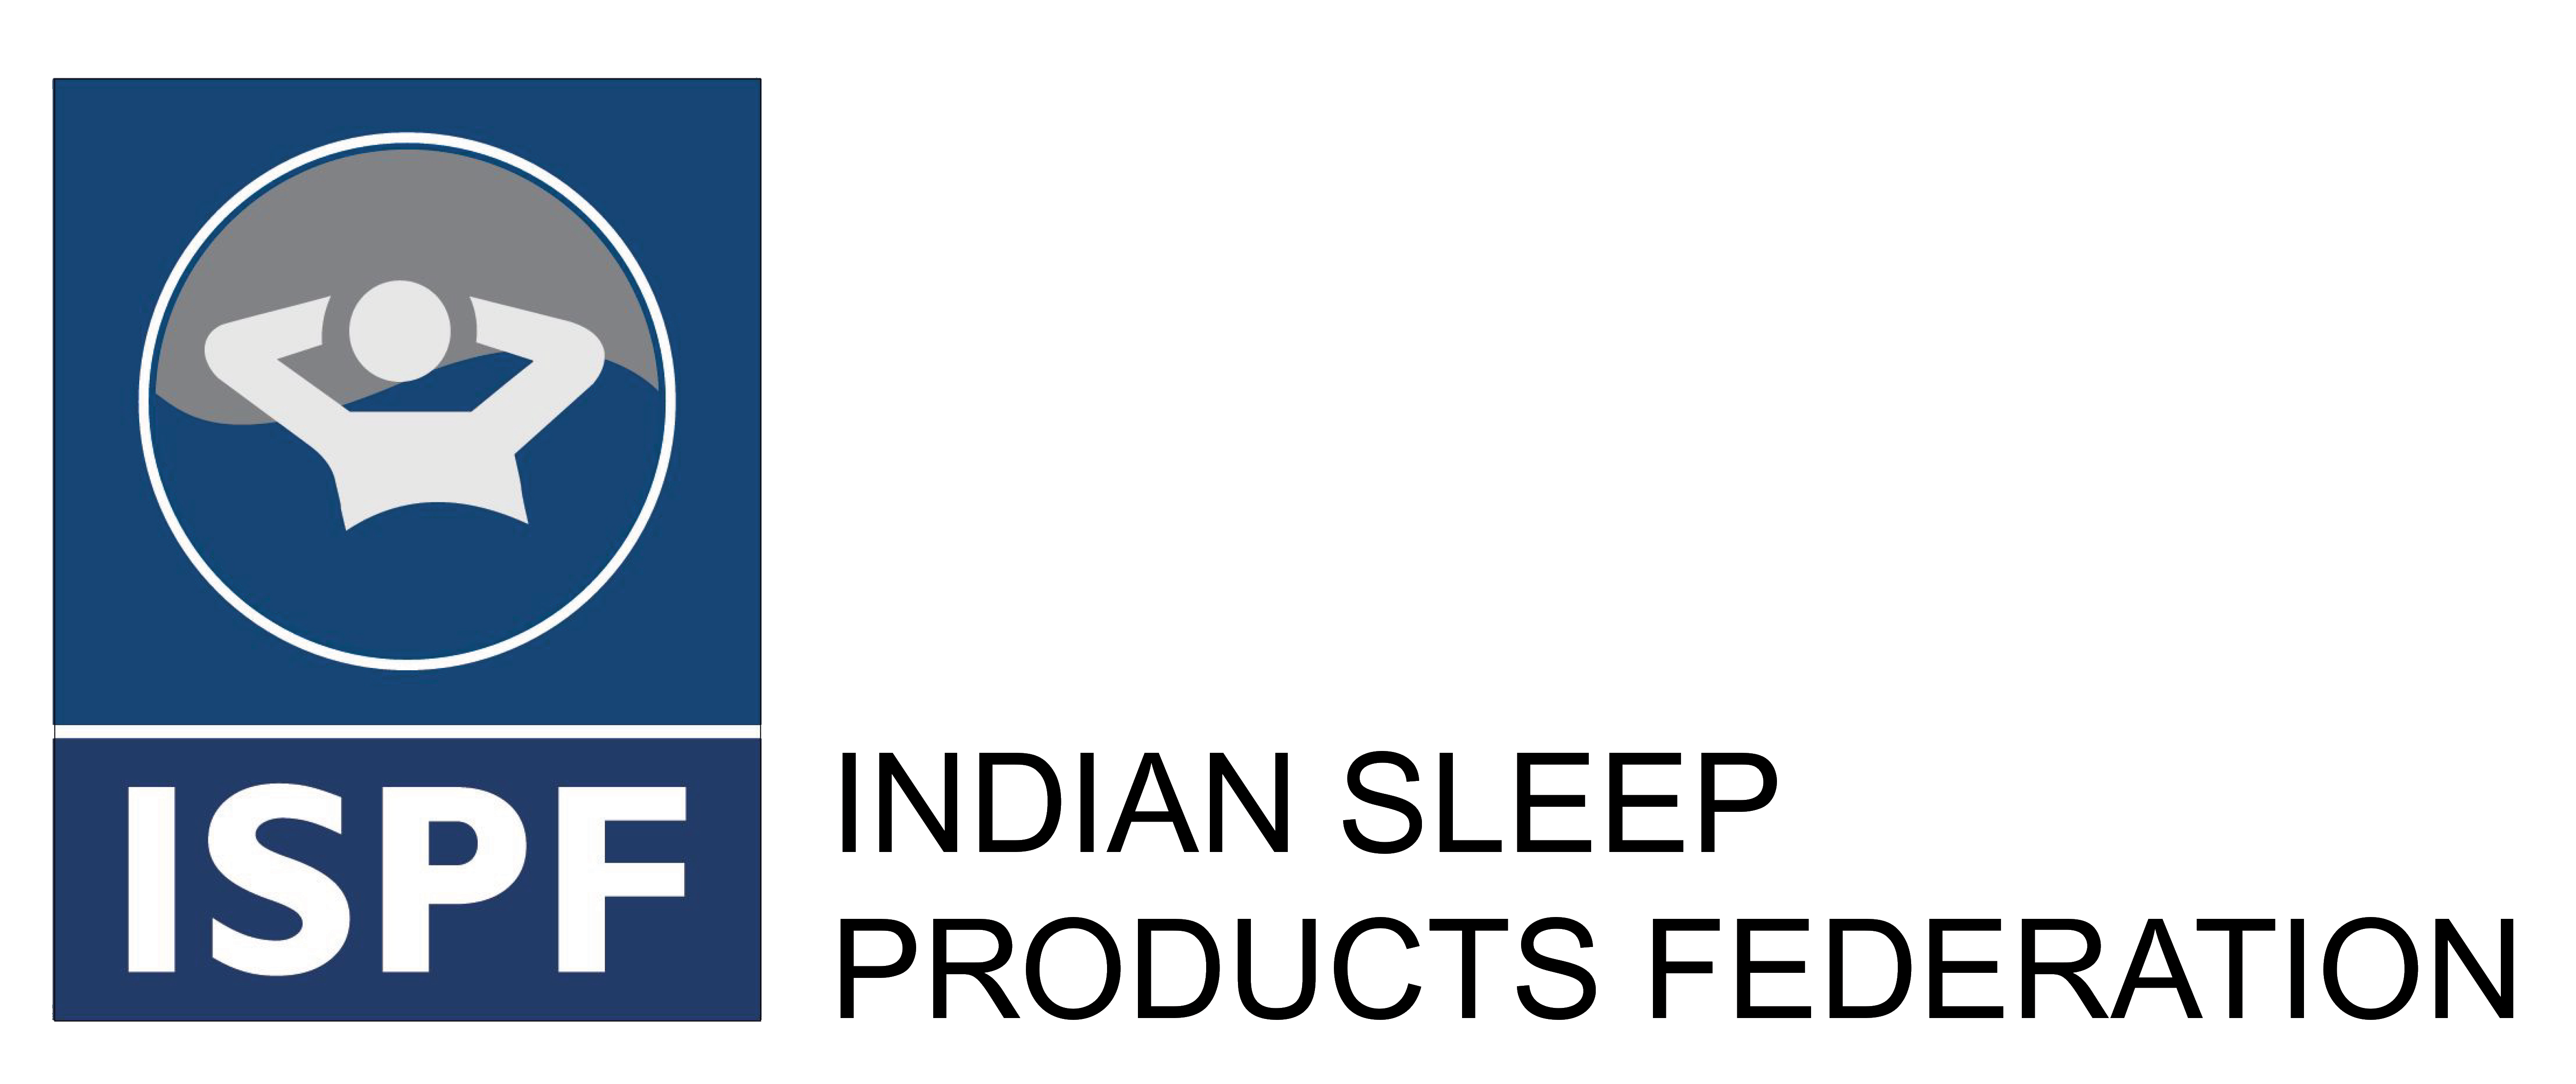 Indian Sleep Products Federation | Indian Mattress industry